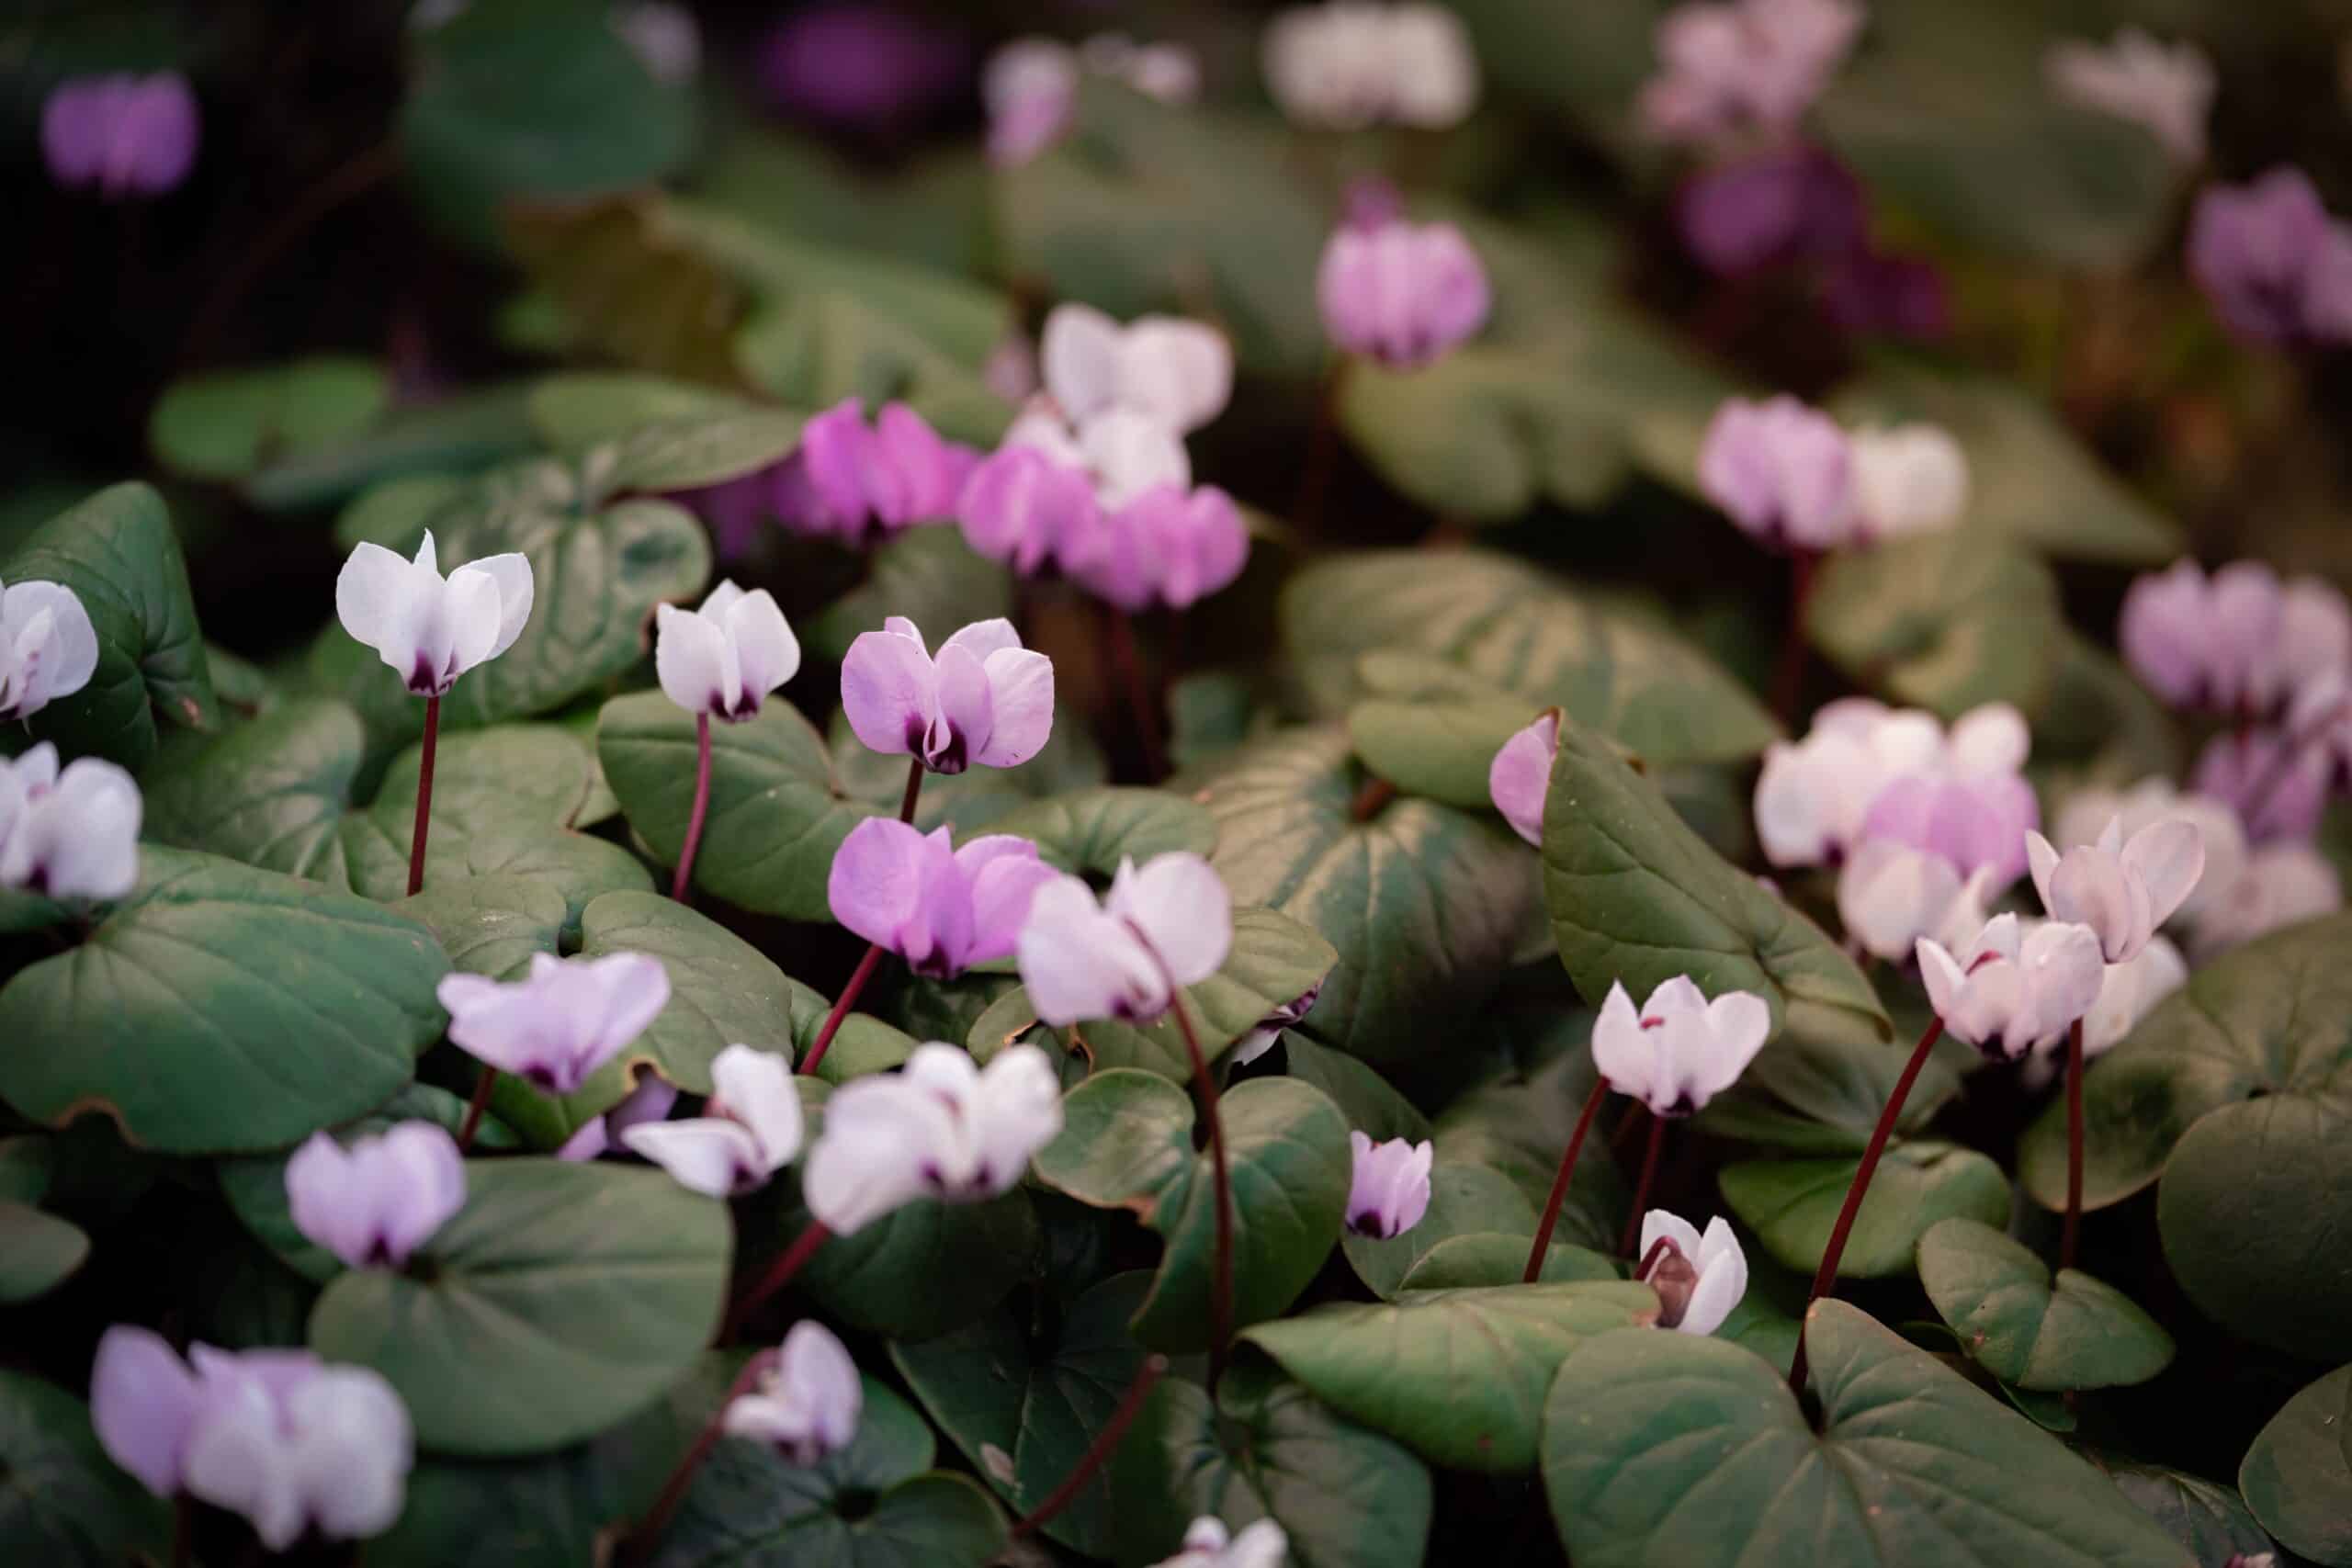 Cyclamen Meaning and Symbolism